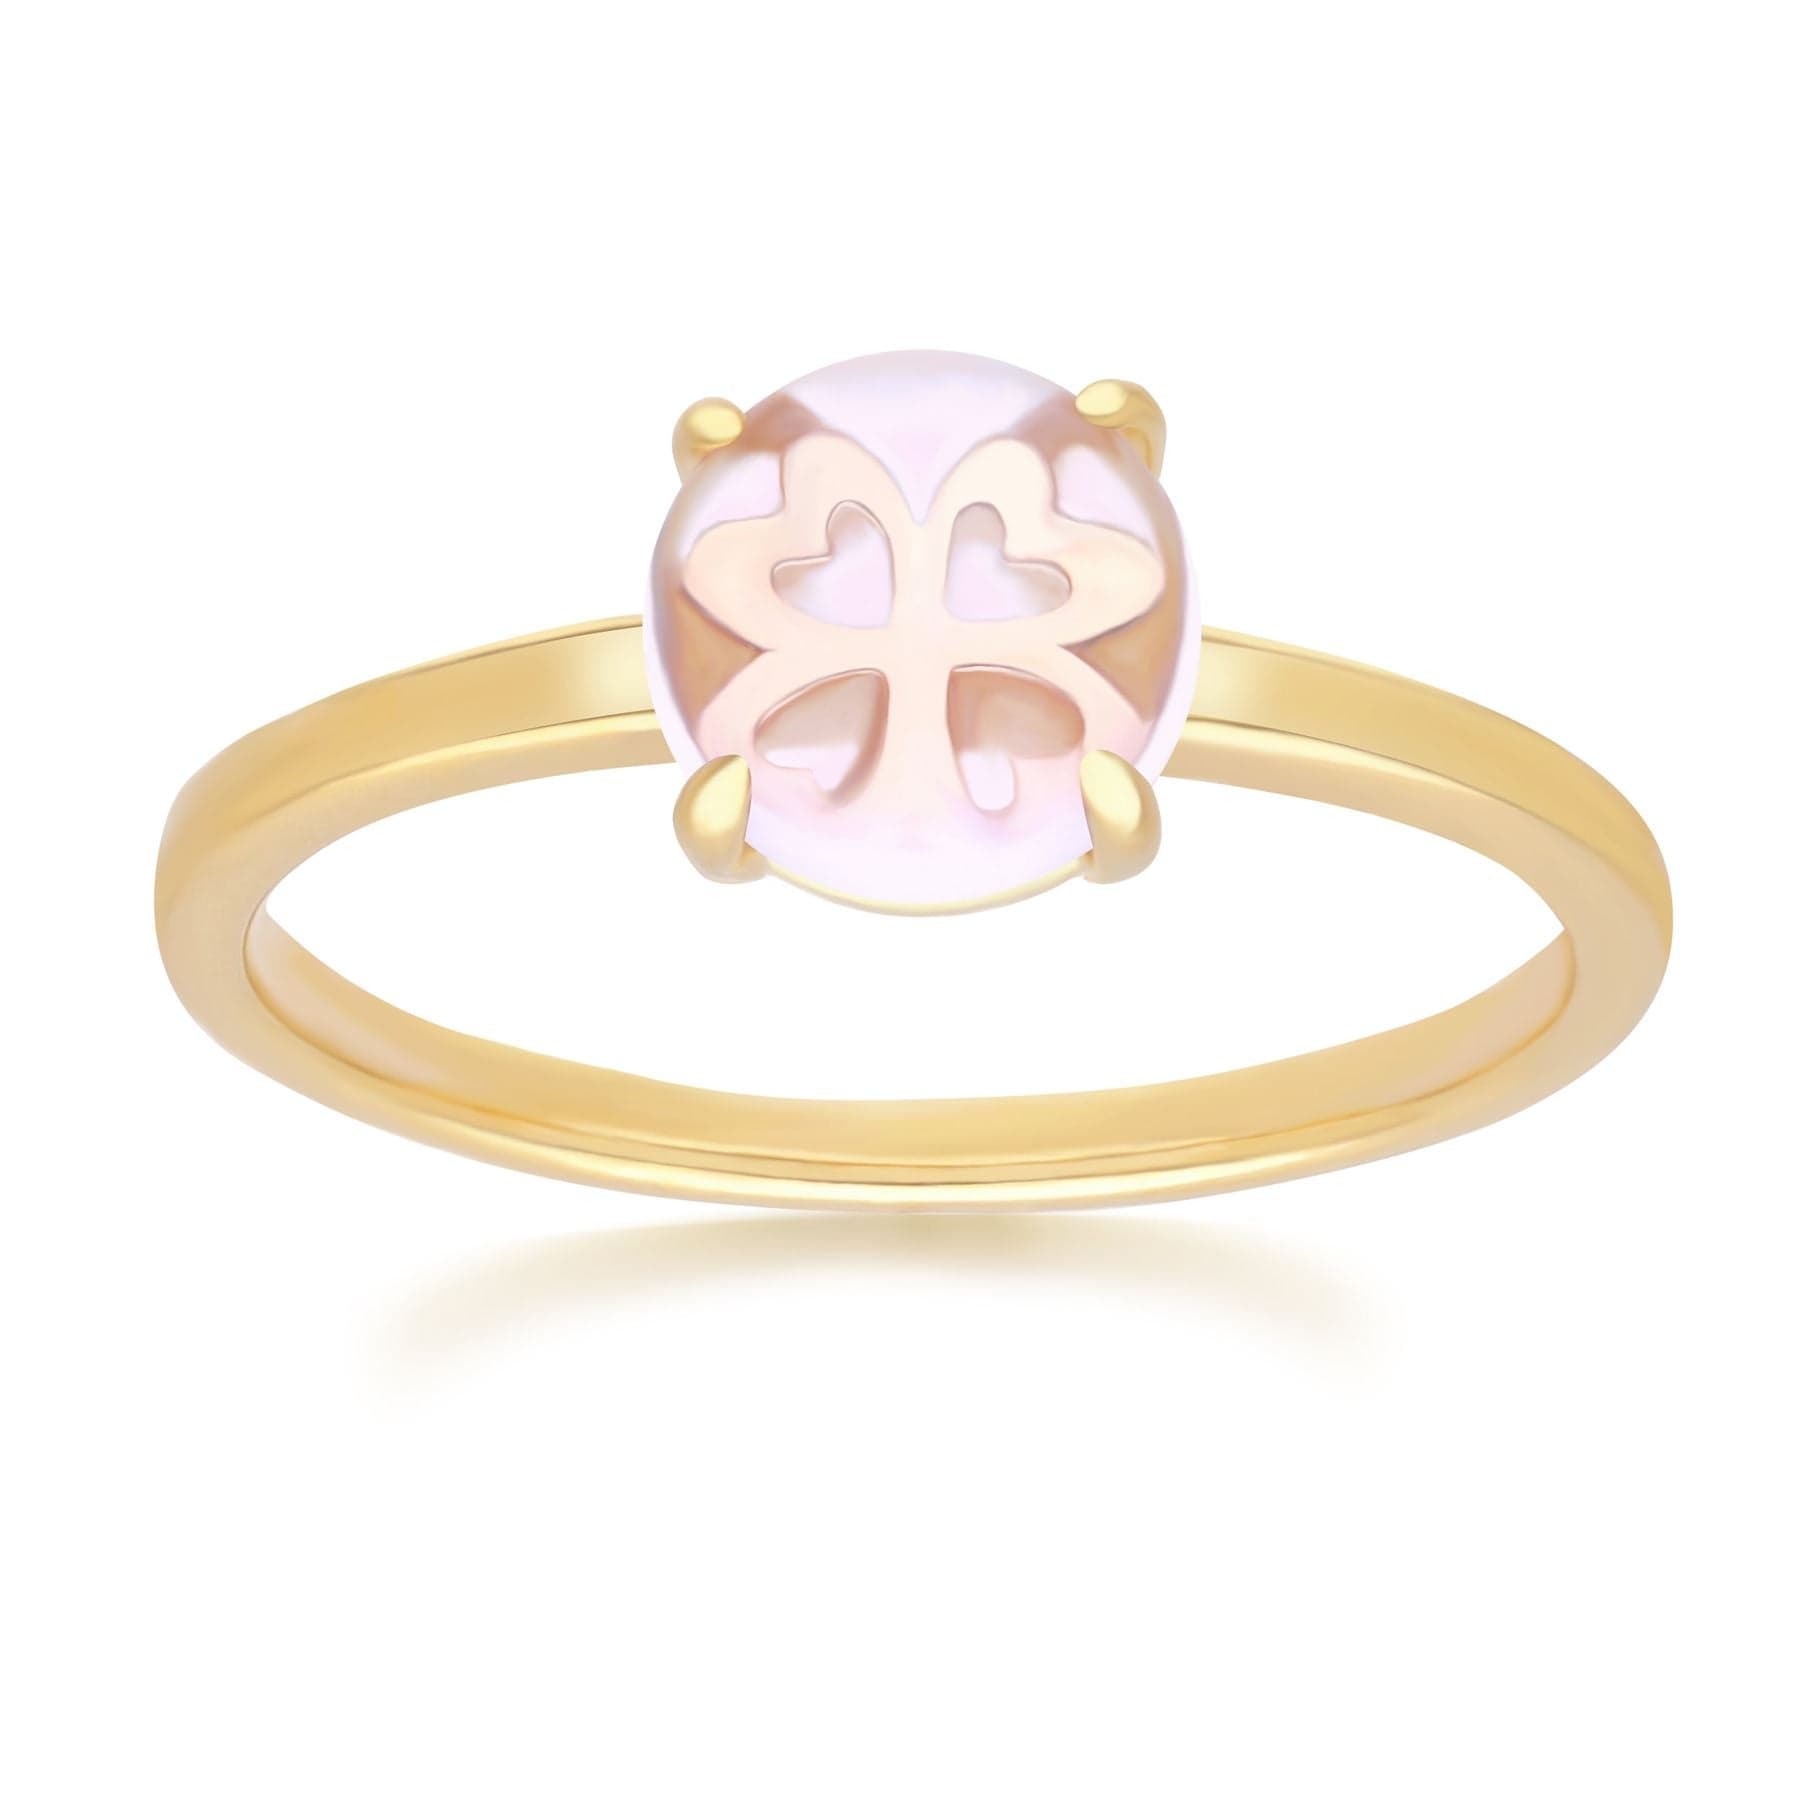 Gardenia Pink Amethyst Cabochon Ring in Gold Plated Sterling Silver - Gemondo